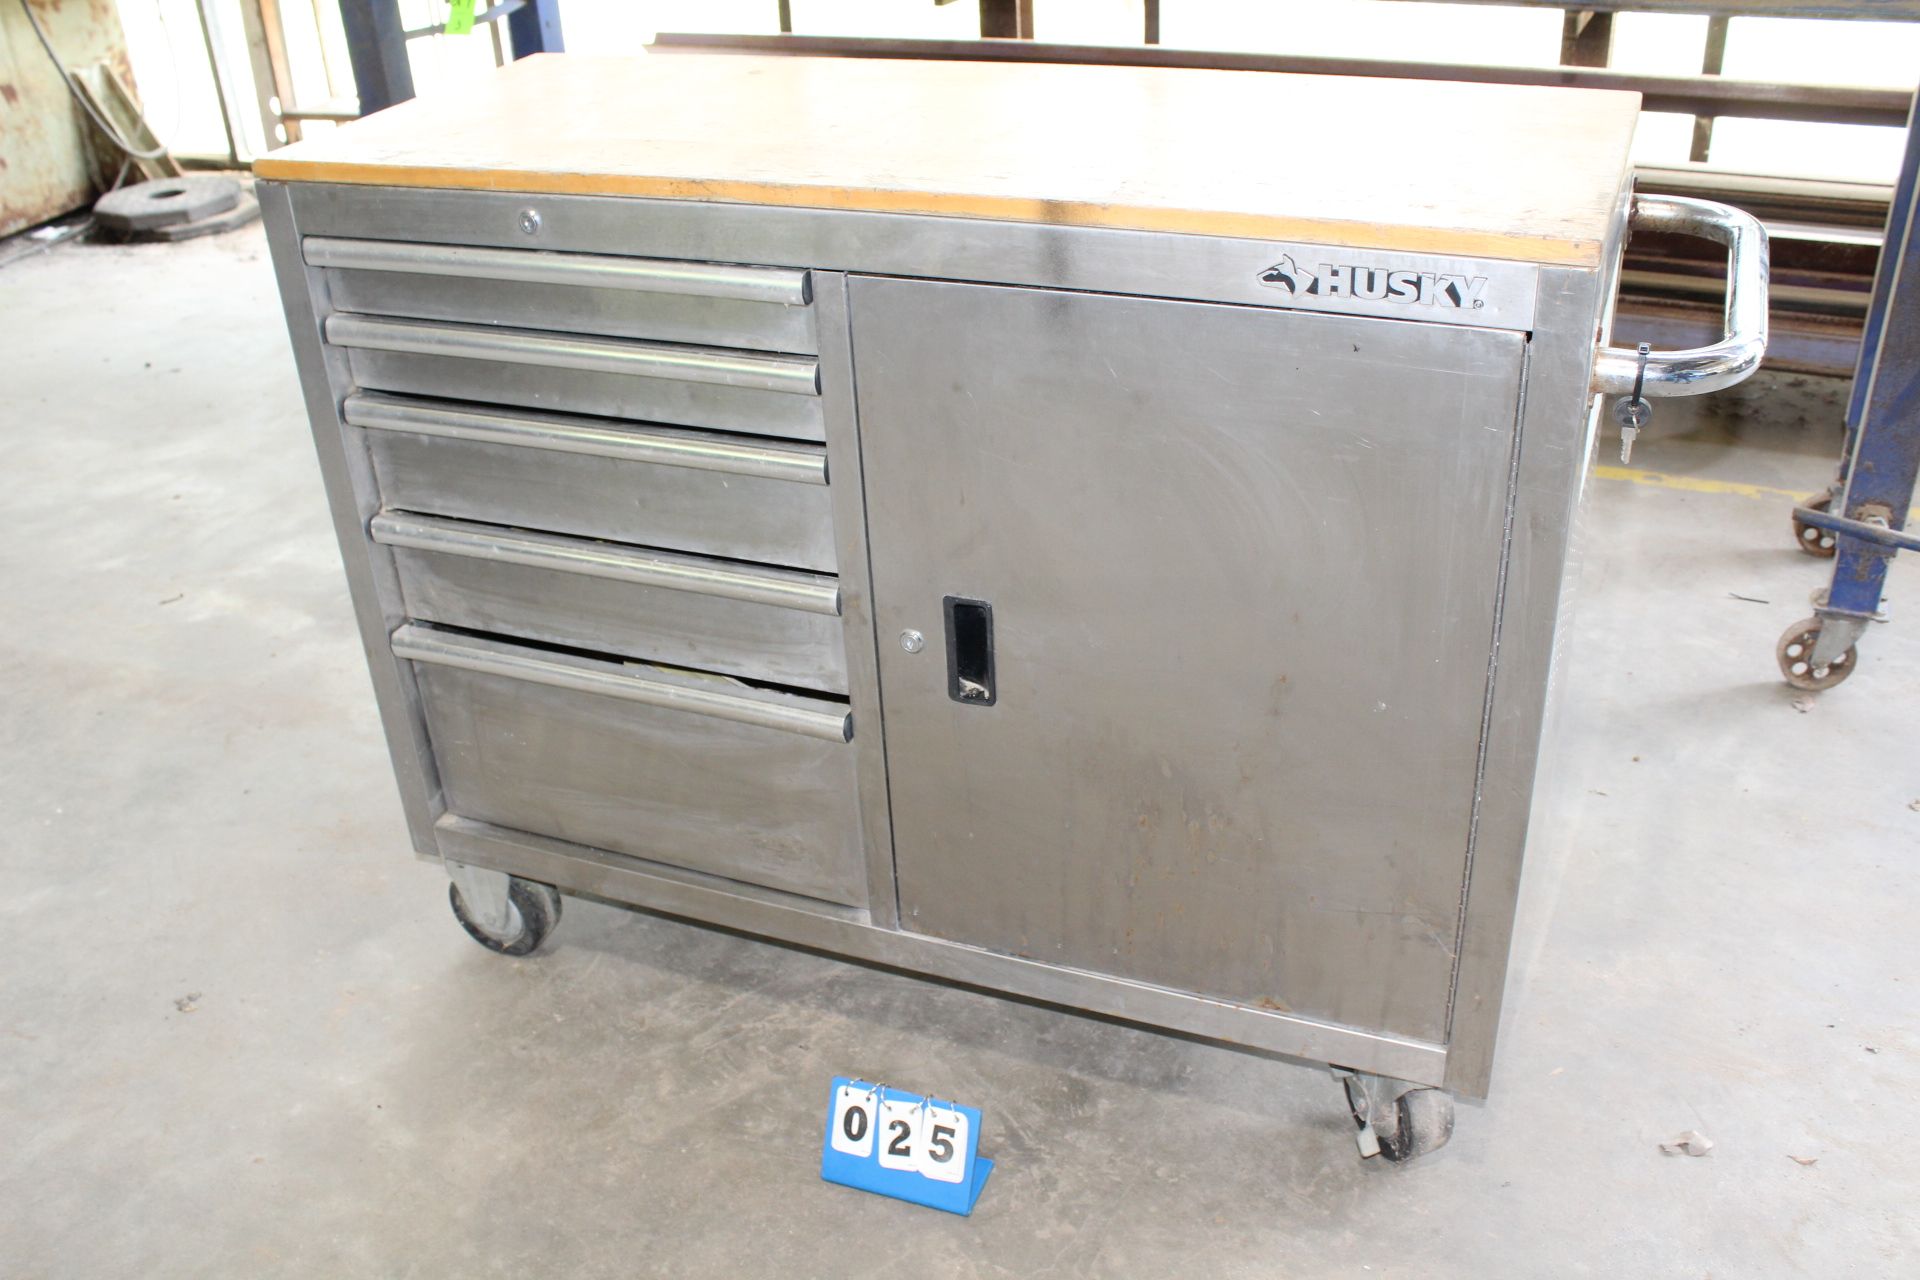 Husky Metal Tool Cabinet on Casters, Approx. 46"L x 18"D x 37"H, with Contents